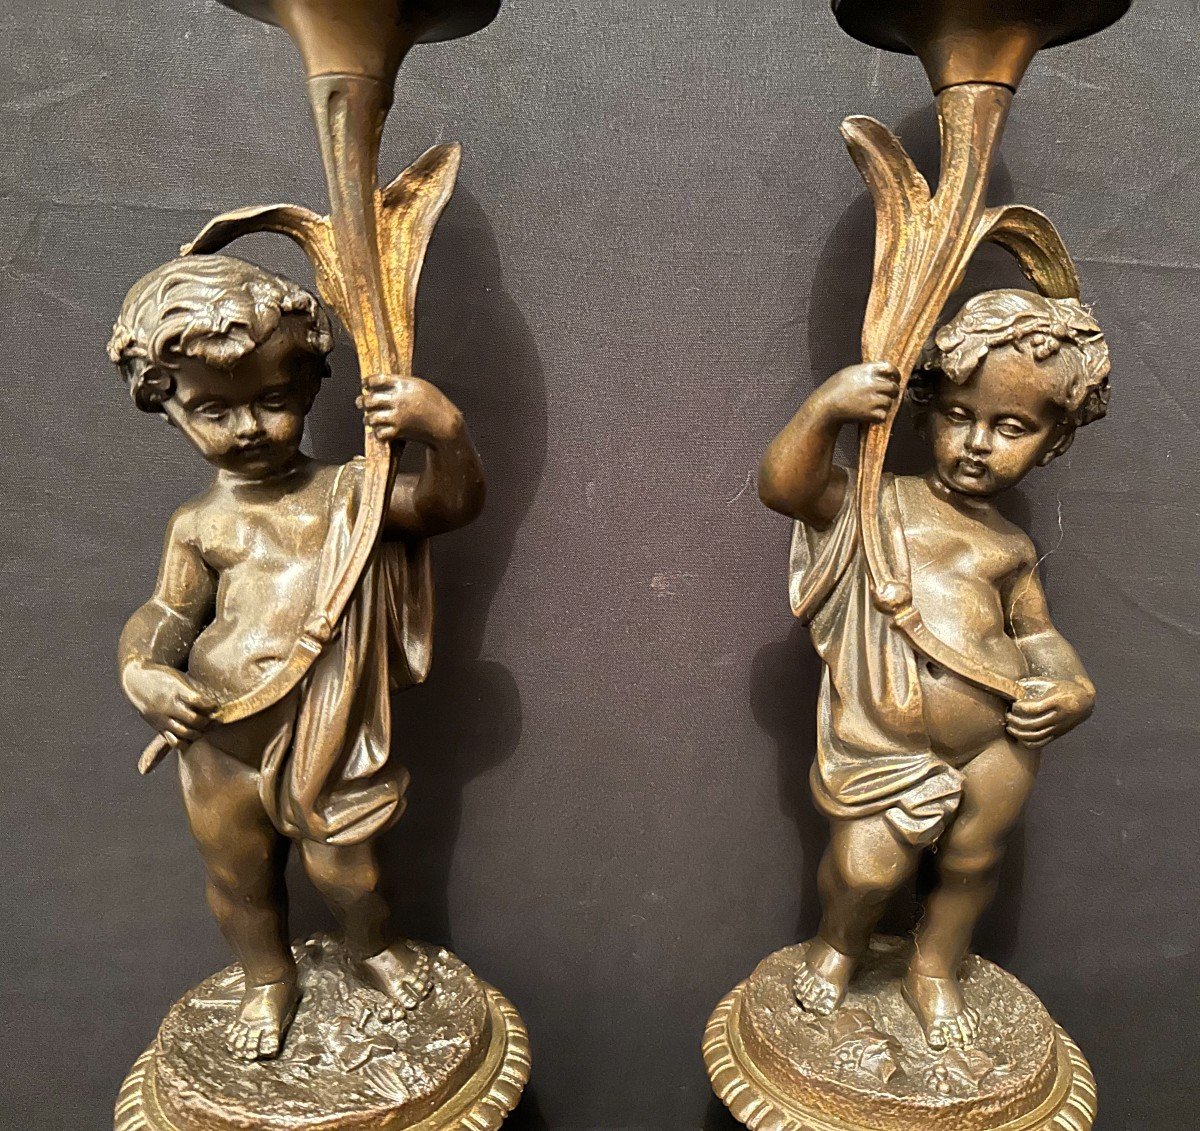 Pair Of Candlesticks Lamps With Bronze Putti Napoleon III Period 19th Century-photo-3